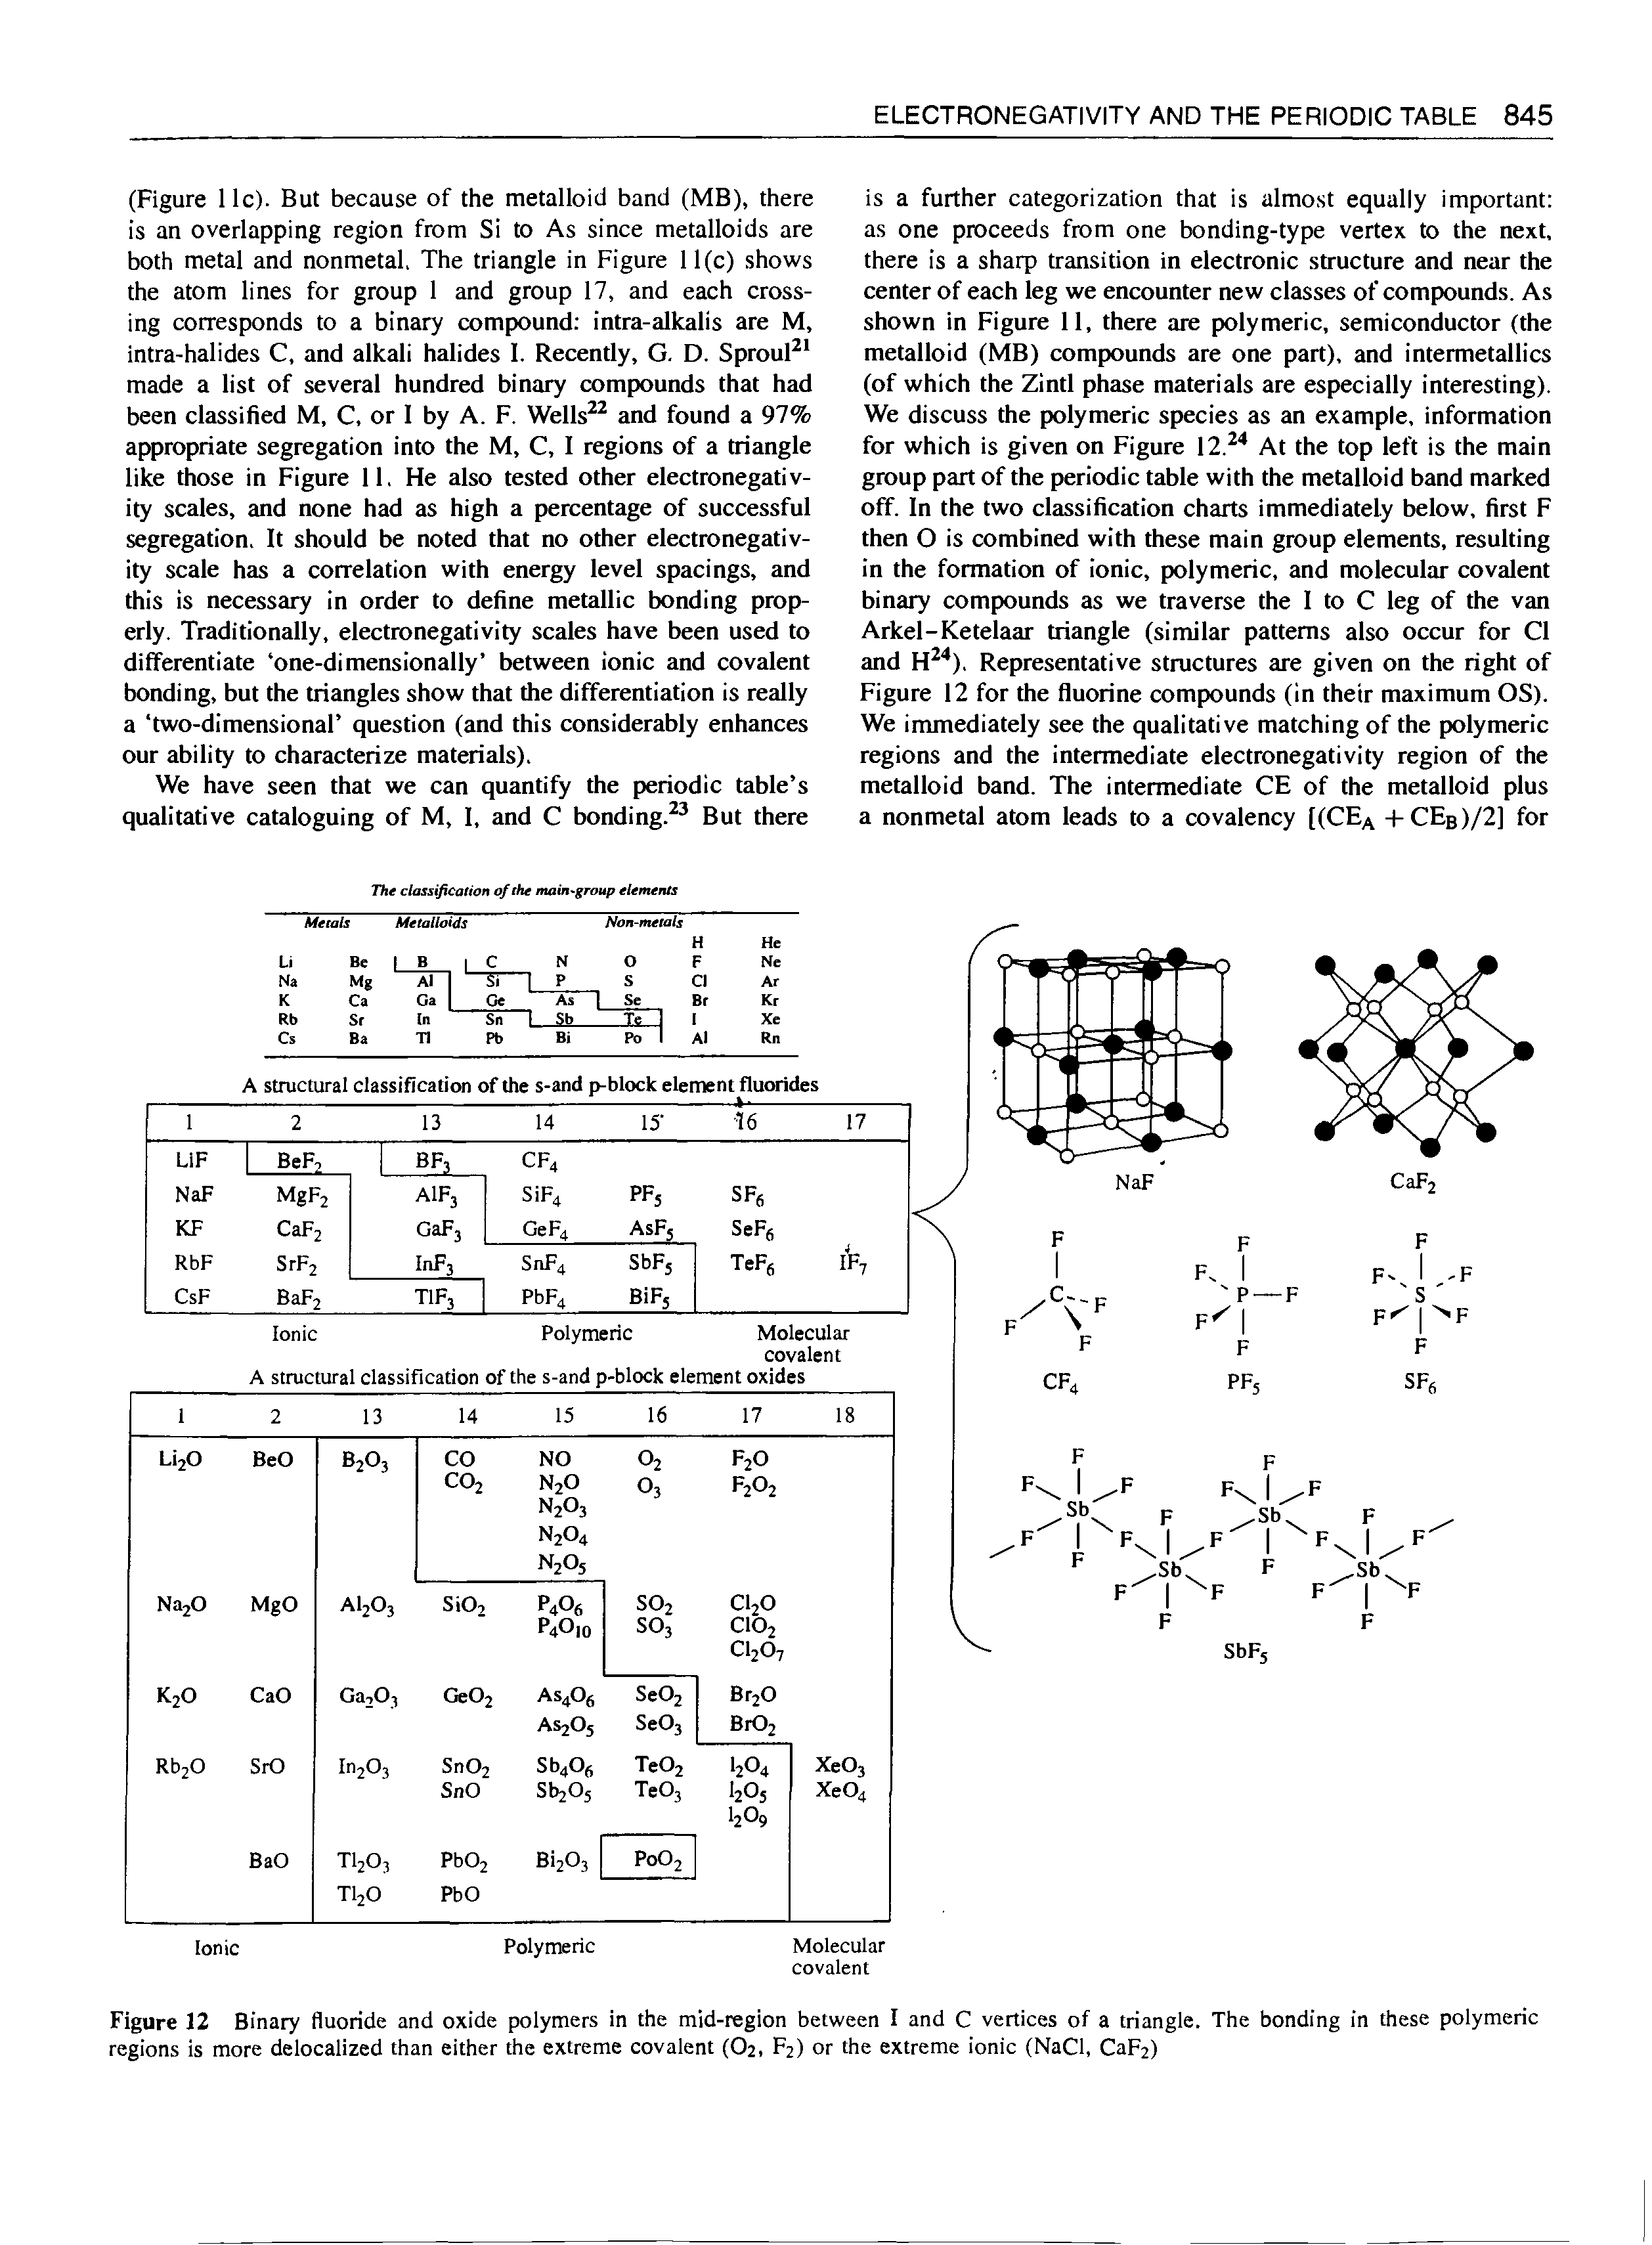 Figure 12 Binary fluoride and oxide polymers in the mid-region between I and C vertices of a triangle. The bonding in these polymeric regions is more delocalized than either the extreme covalent (O2, F2) or the extreme ionic (NaCl, Cap2)...